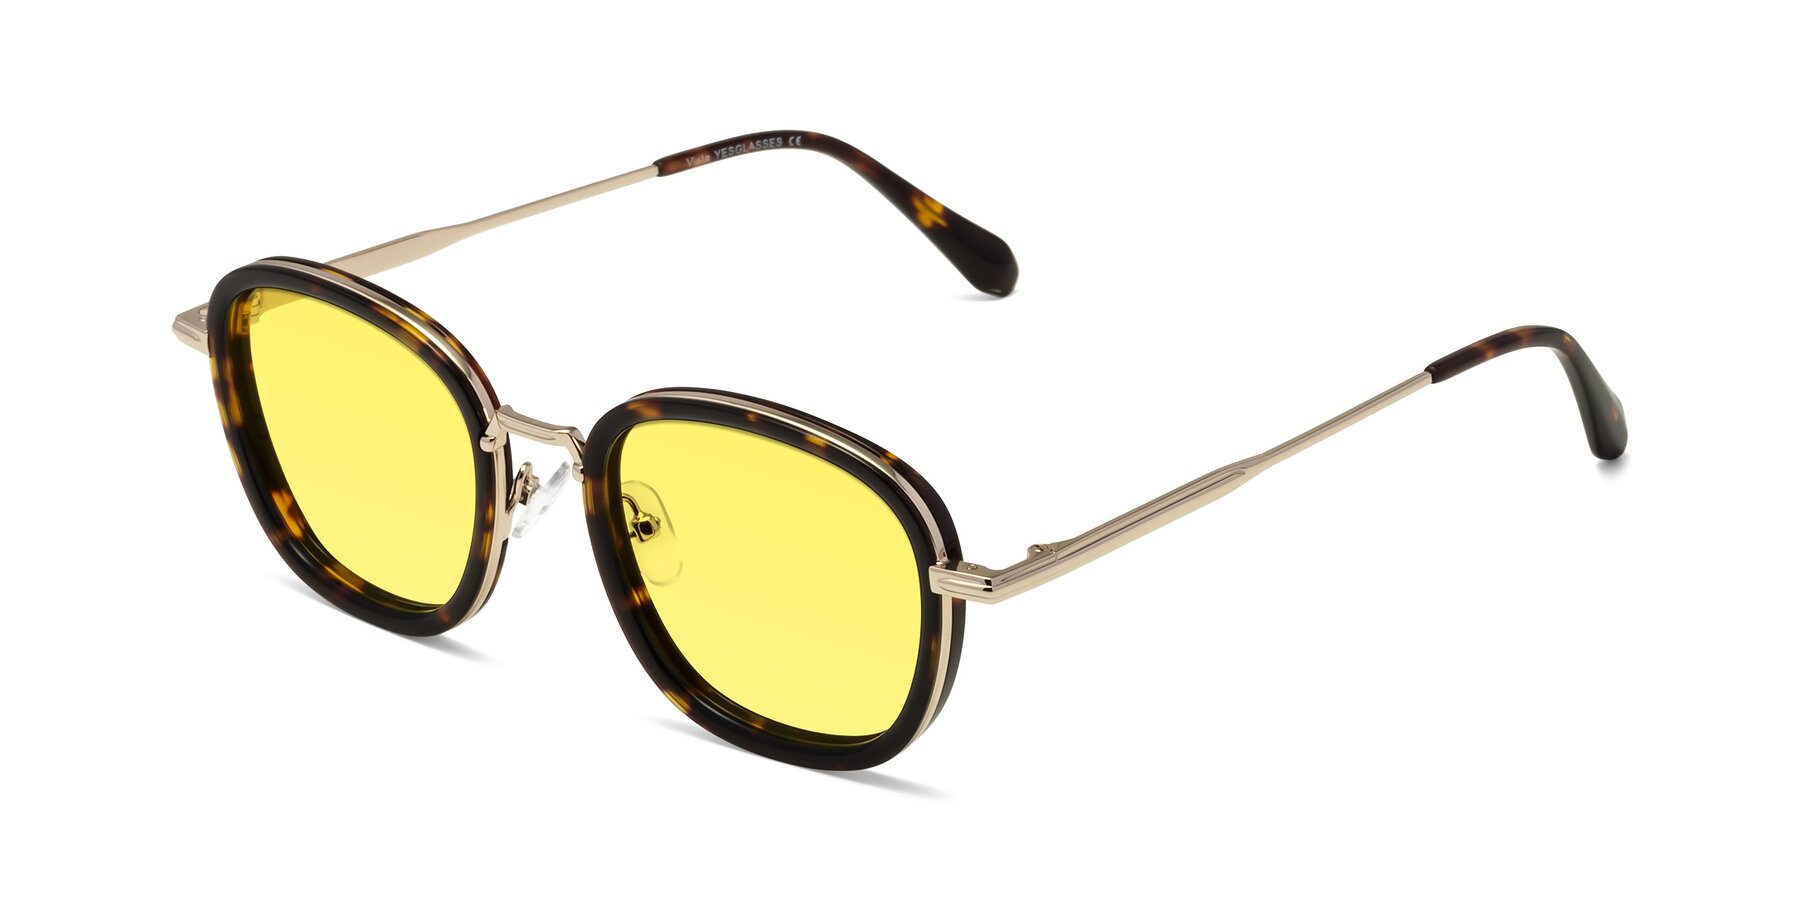 Angle of Vista in Tortoise-Light Gold with Medium Yellow Tinted Lenses